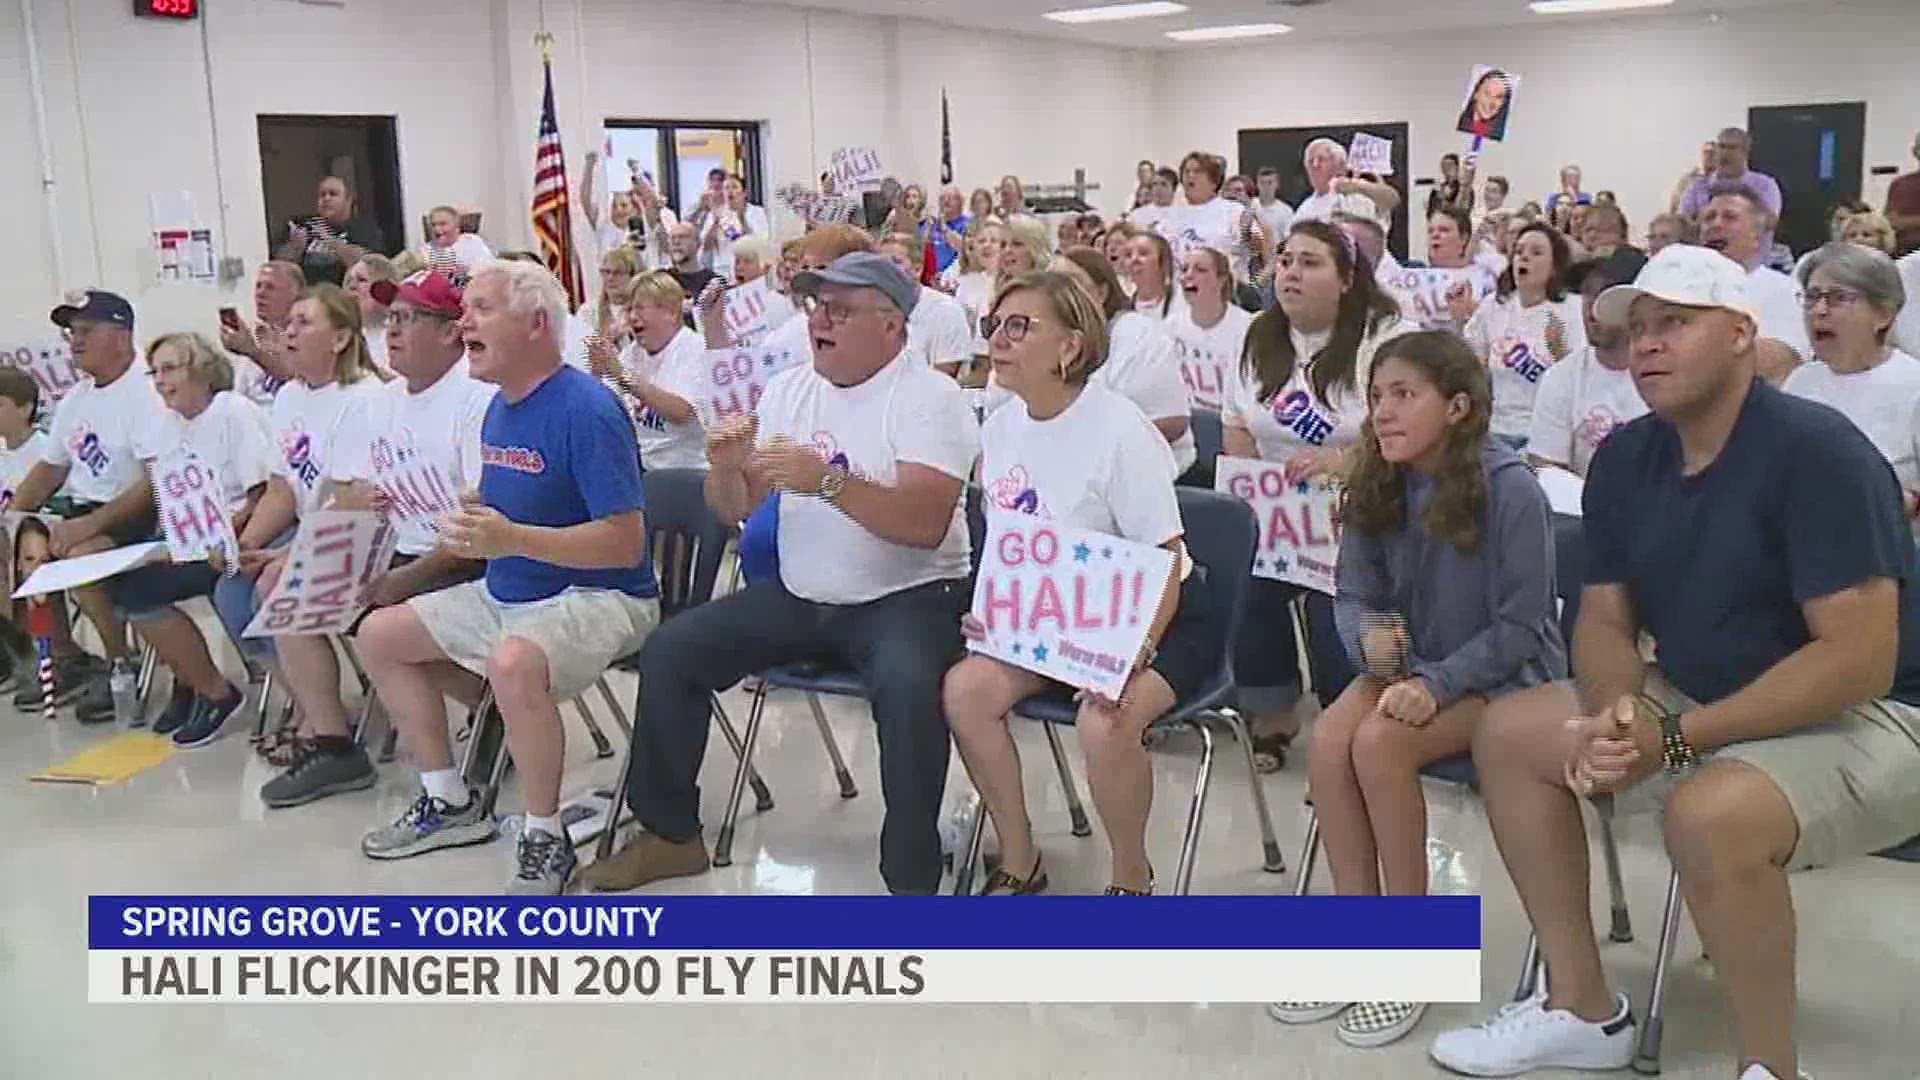 "Go Hali" watch party see Spring Grove native claim second medal of the 2020 Olympics